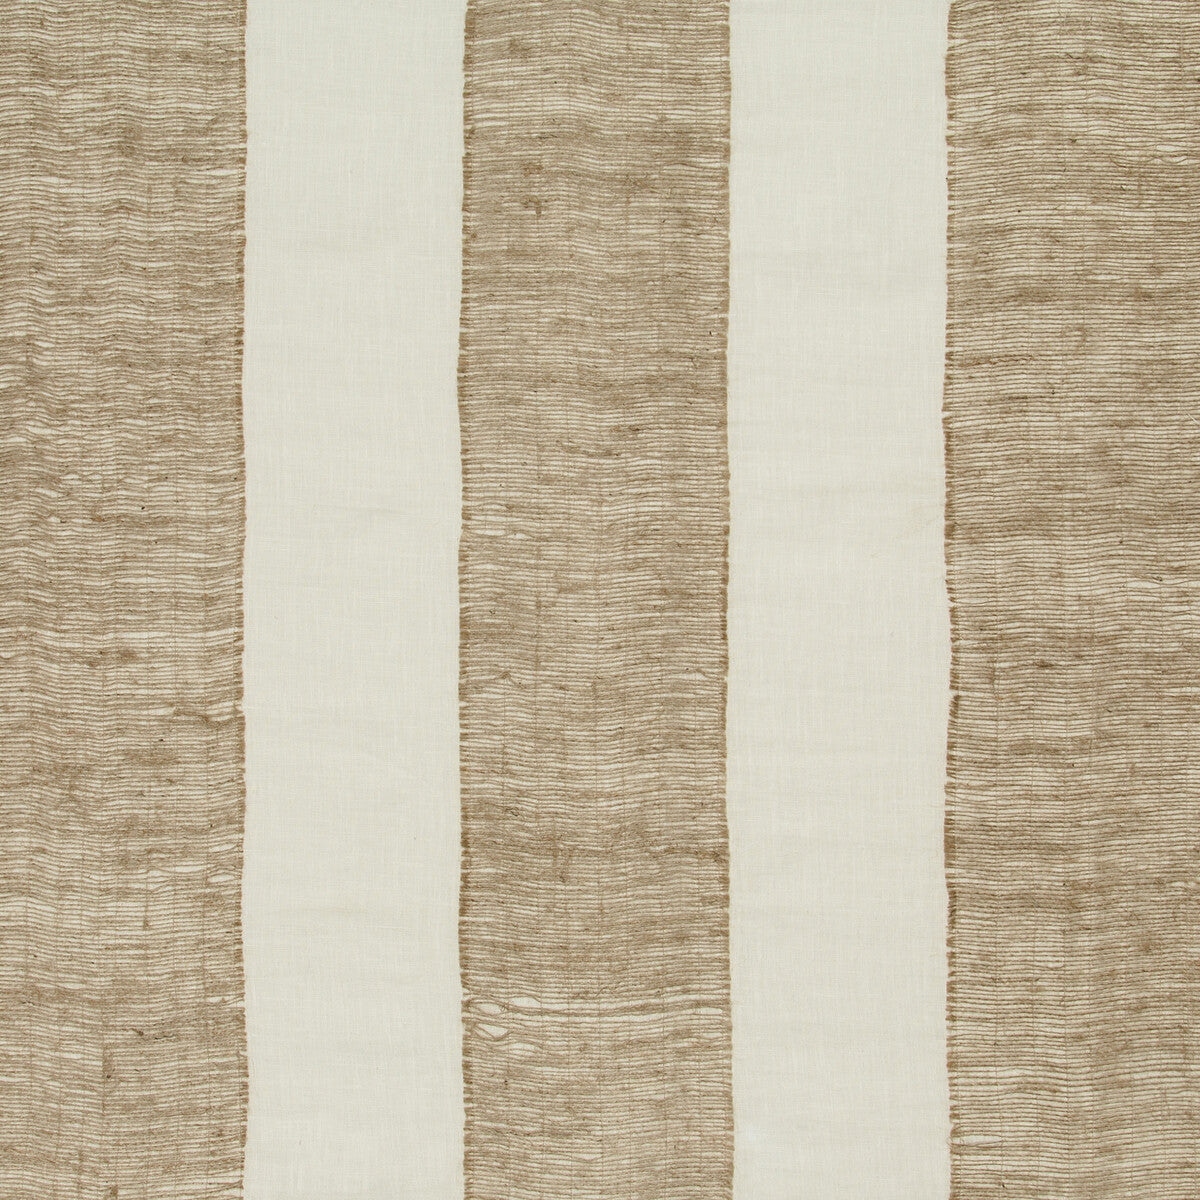 No Frills fabric in honey color - pattern 4613.106.0 - by Kravet Design in the Nate Berkus Well-Traveled collection